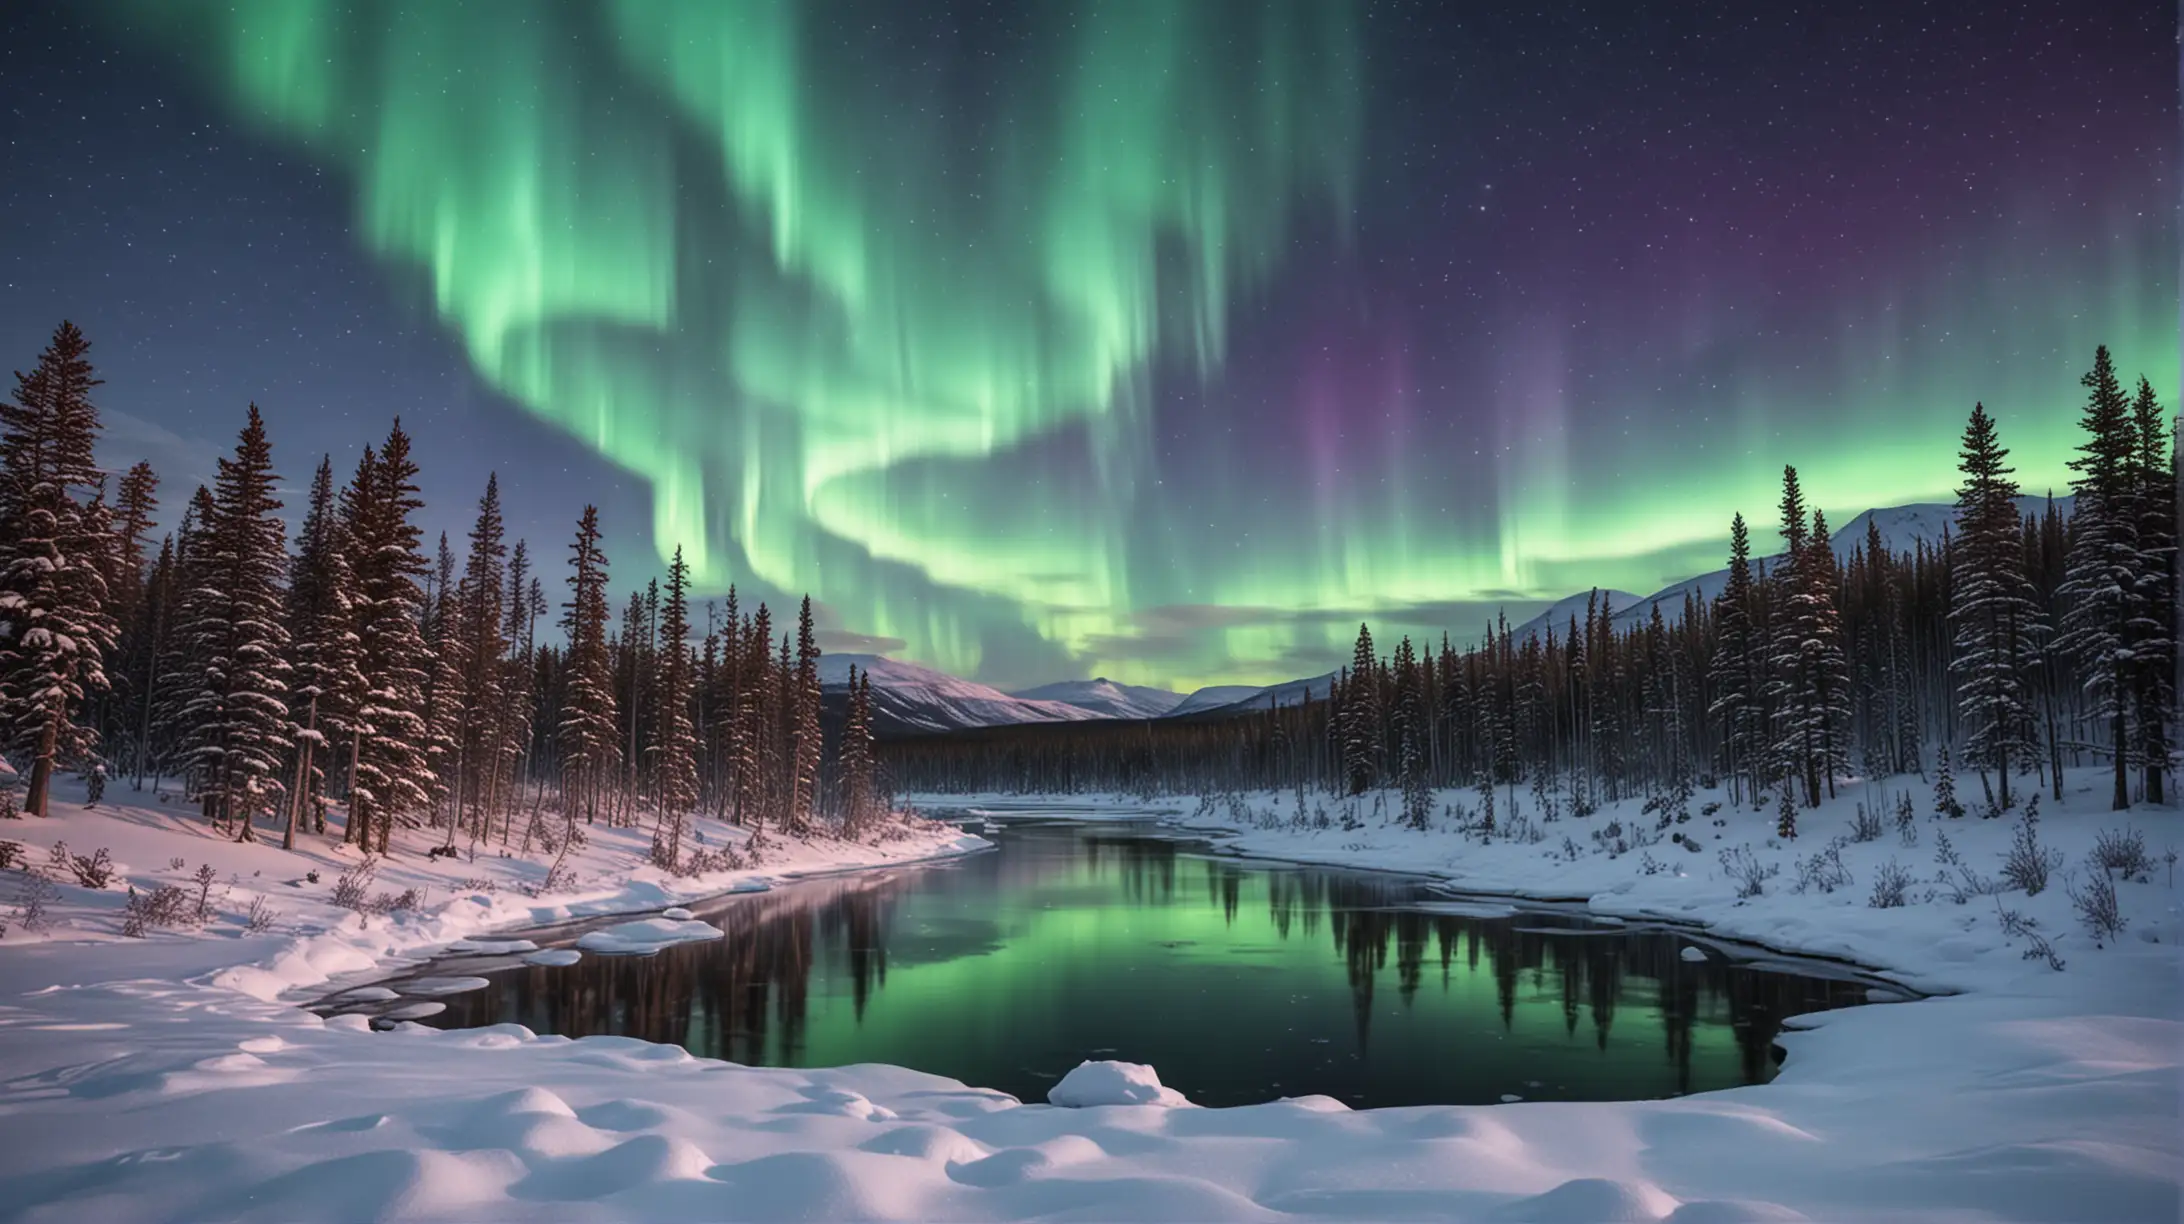 Vibrant Northern Lights Painting Snowy Winter Scene with Frozen Lake